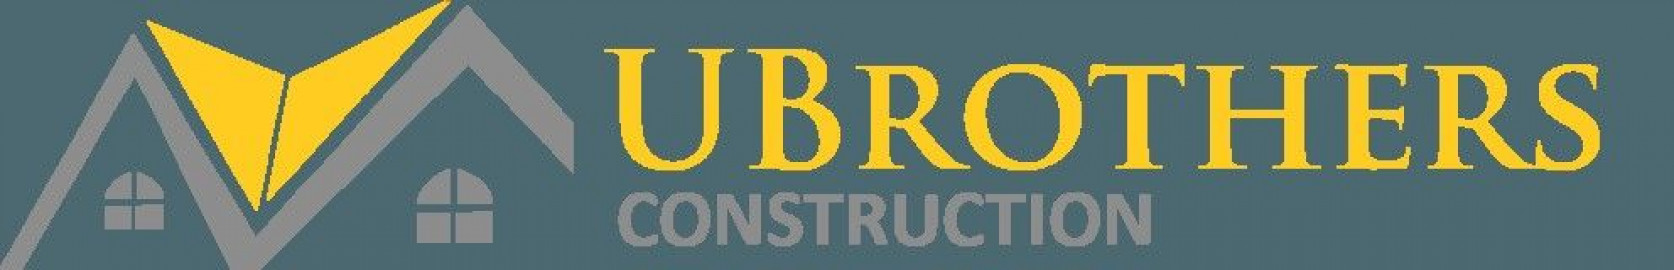 Visit UBrothers Construction